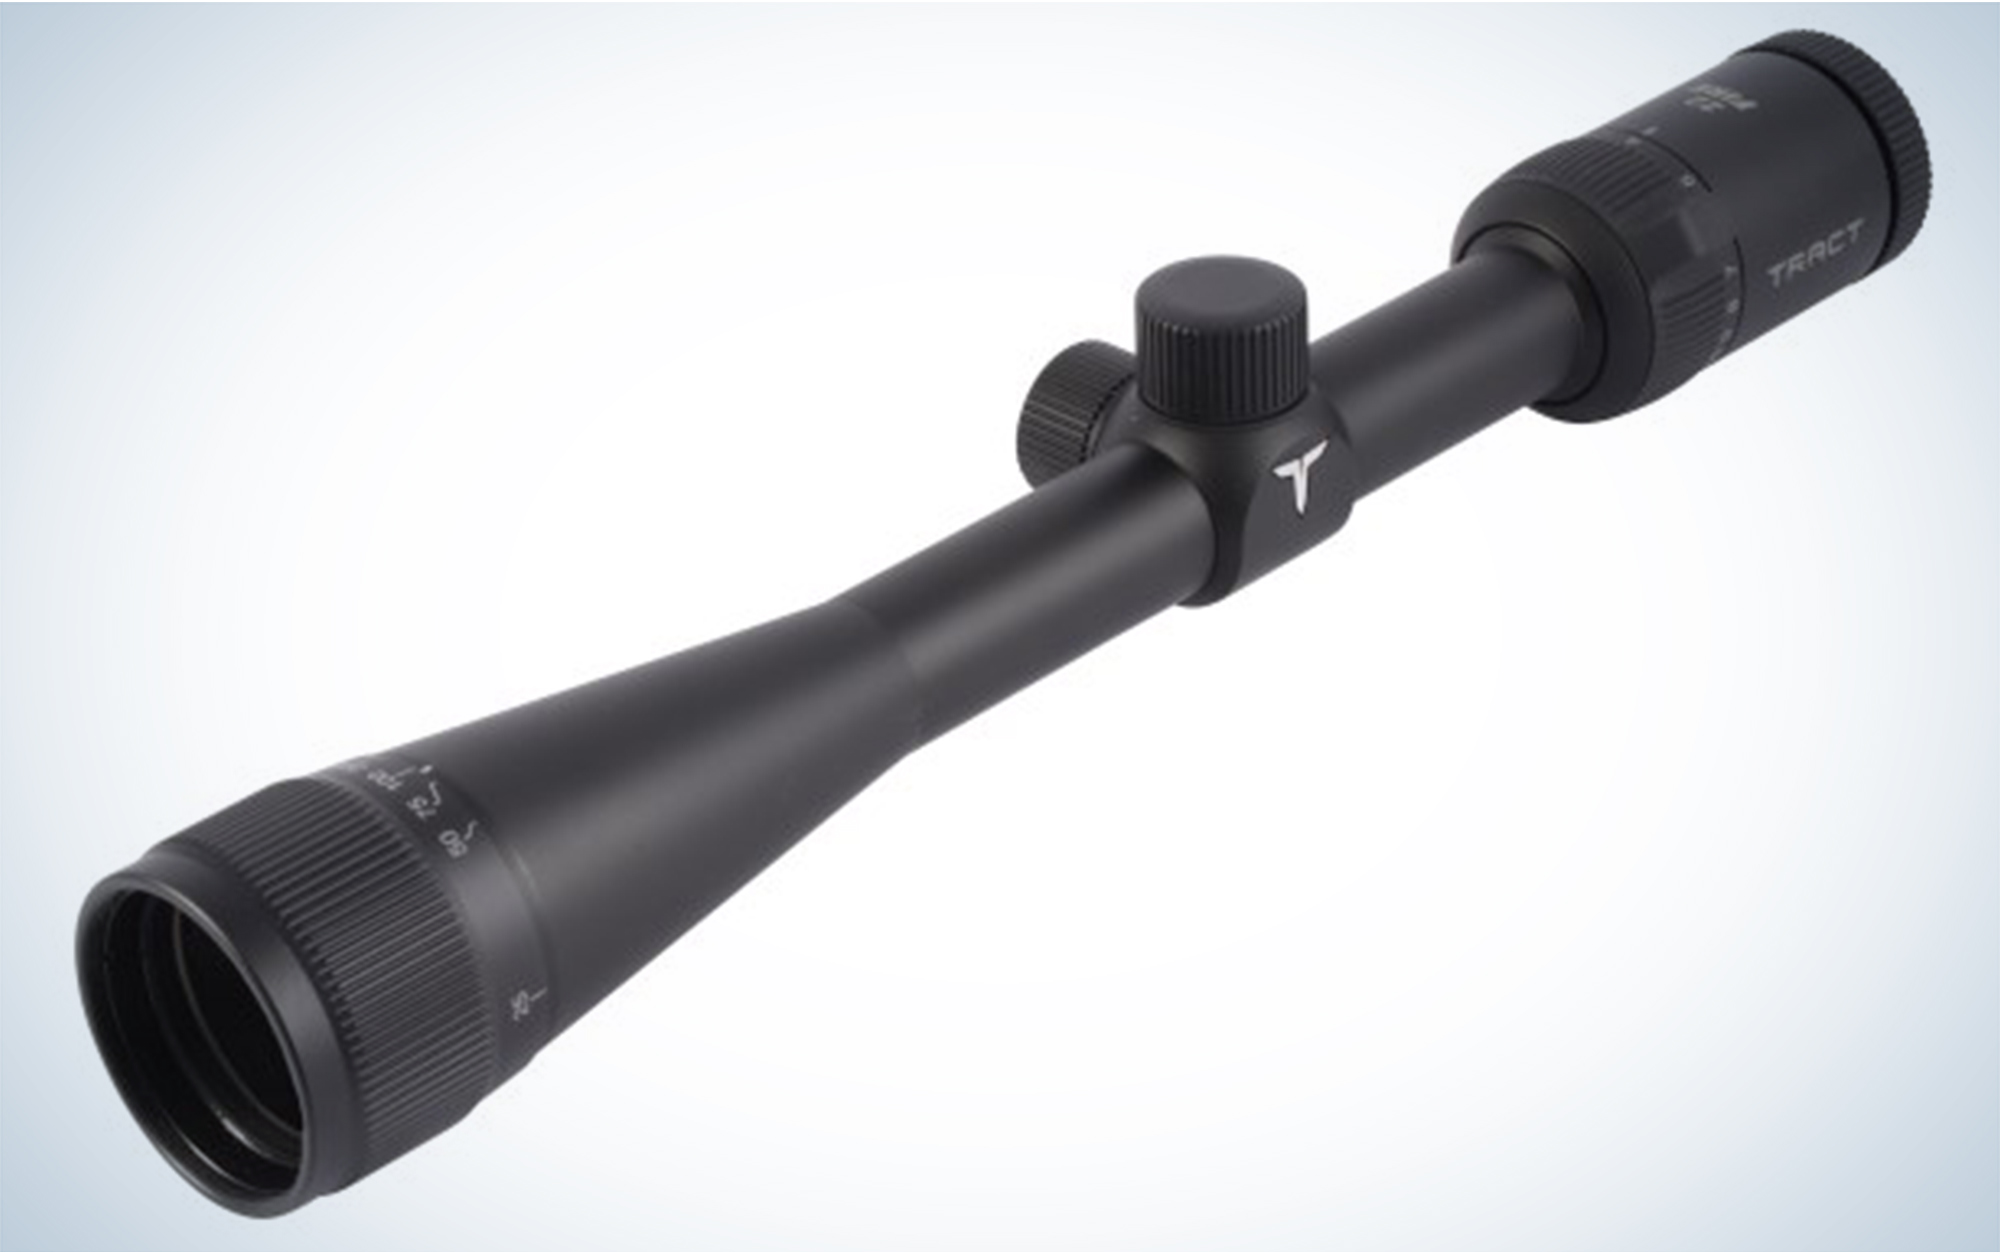 The Tract 22 FIRE 4-12x40 is the best second-plane target scope.